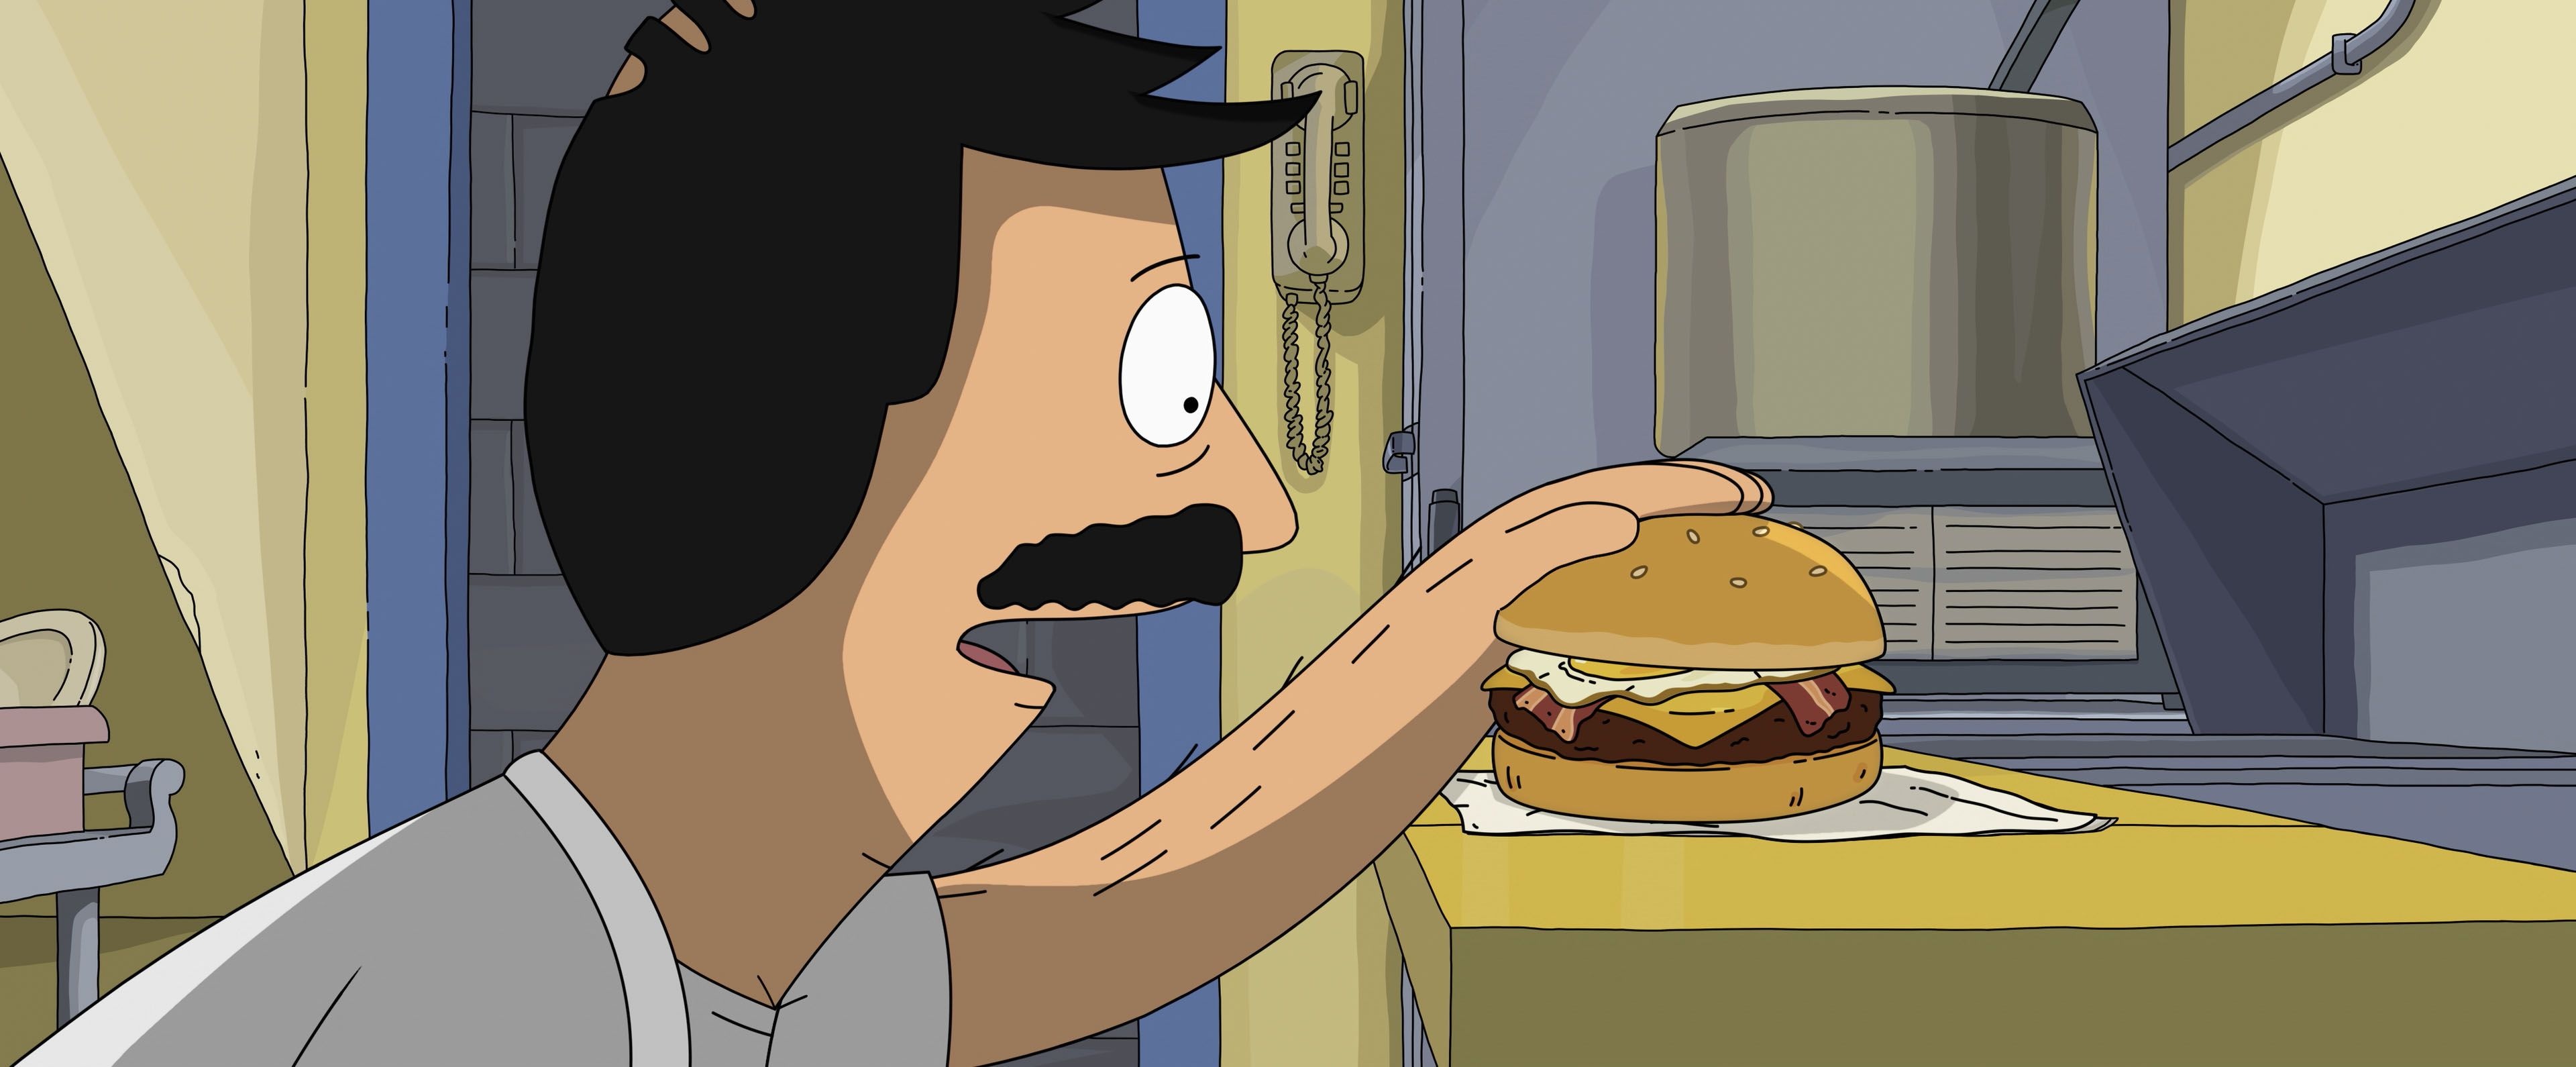 Bob's Burgers movie release, Hilarious animation, Family comedy, Exciting sequel, 3840x1590 Dual Screen Desktop